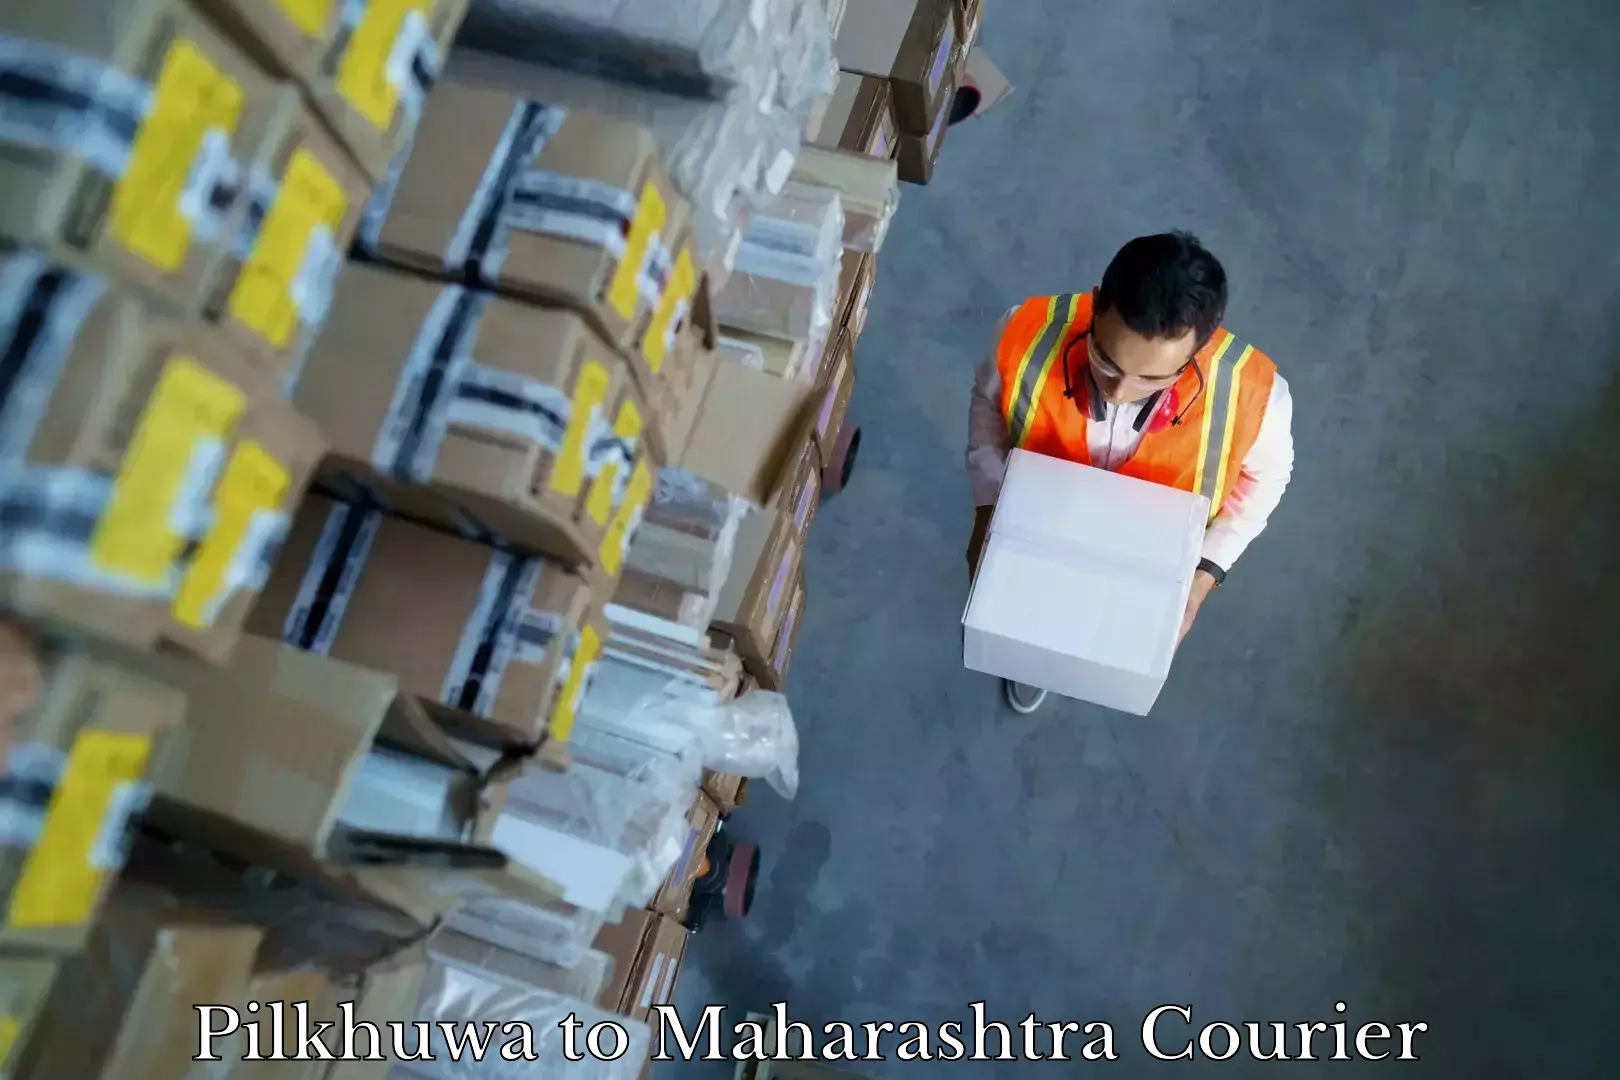 Efficient relocation services Pilkhuwa to Lasalgaon